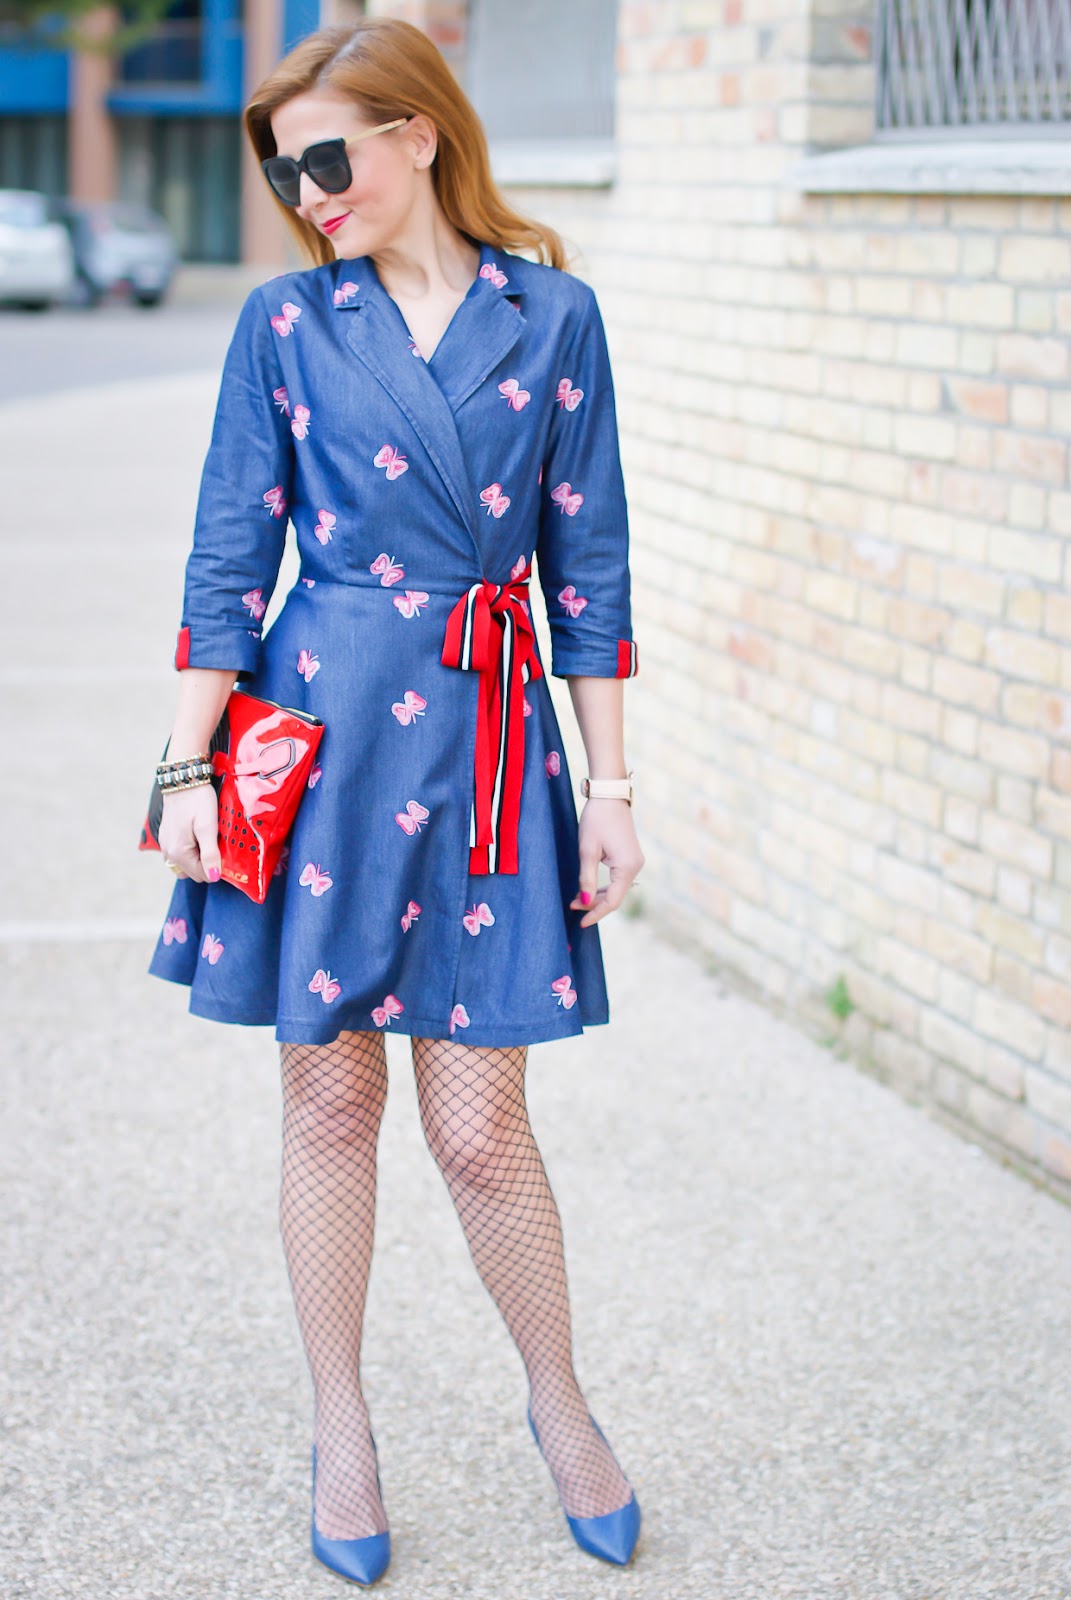 Butterfly denim dress from Metisu on Fashion and Cookies fashion blog, fashion blogger style